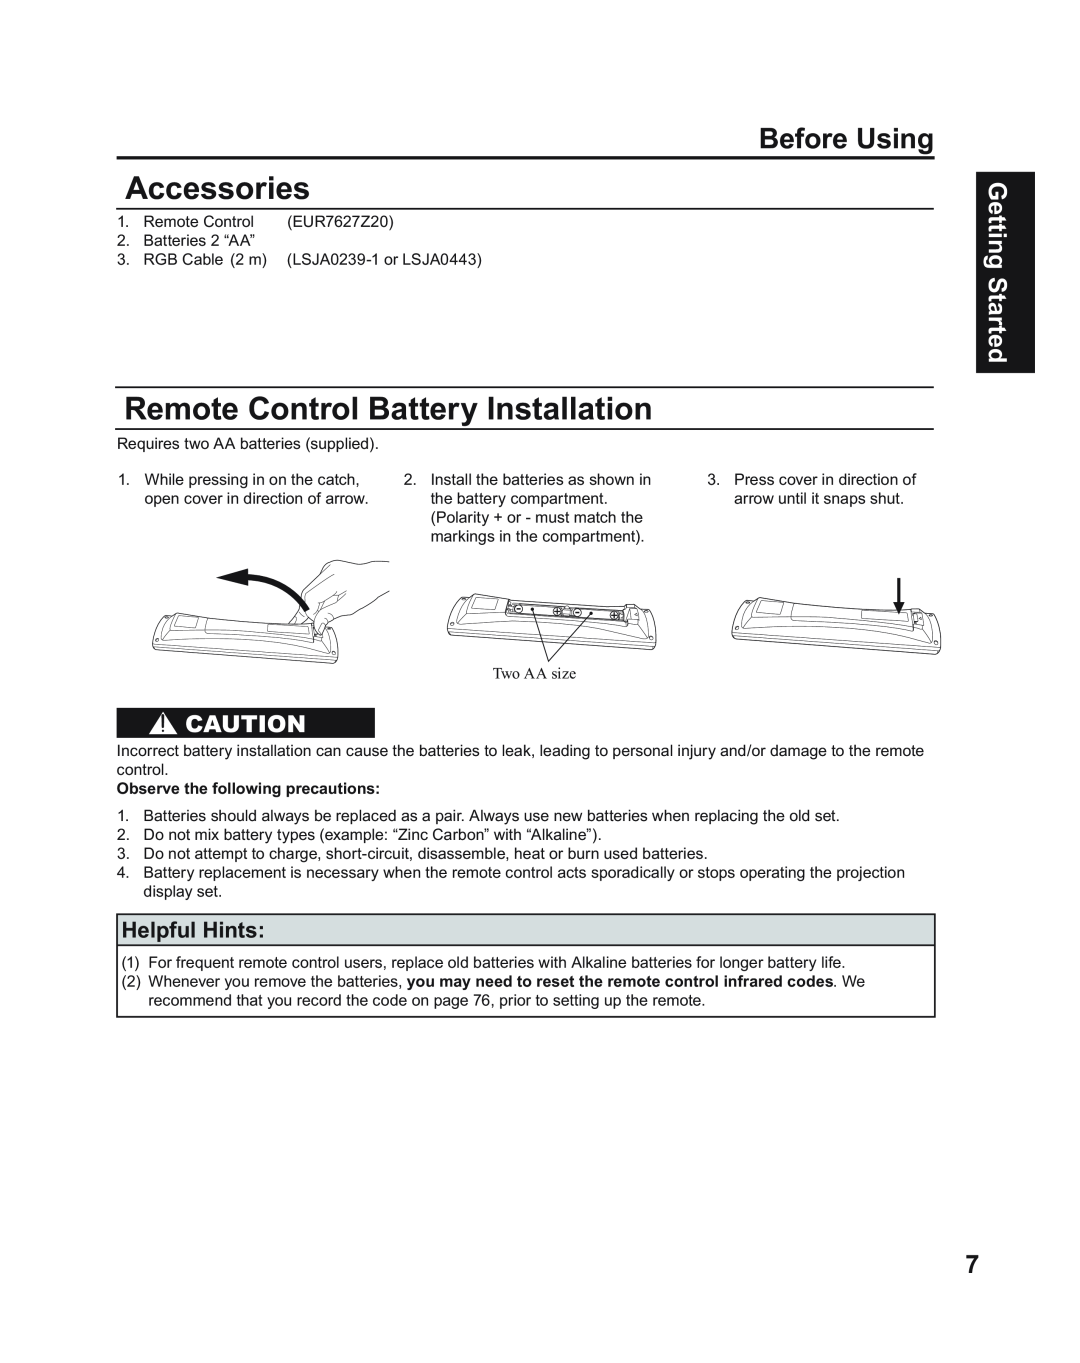 Panasonic PT-50LC14 manual Accessories, Remote Control Battery Installation, Before Using, Helpful Hints, Getting Started 